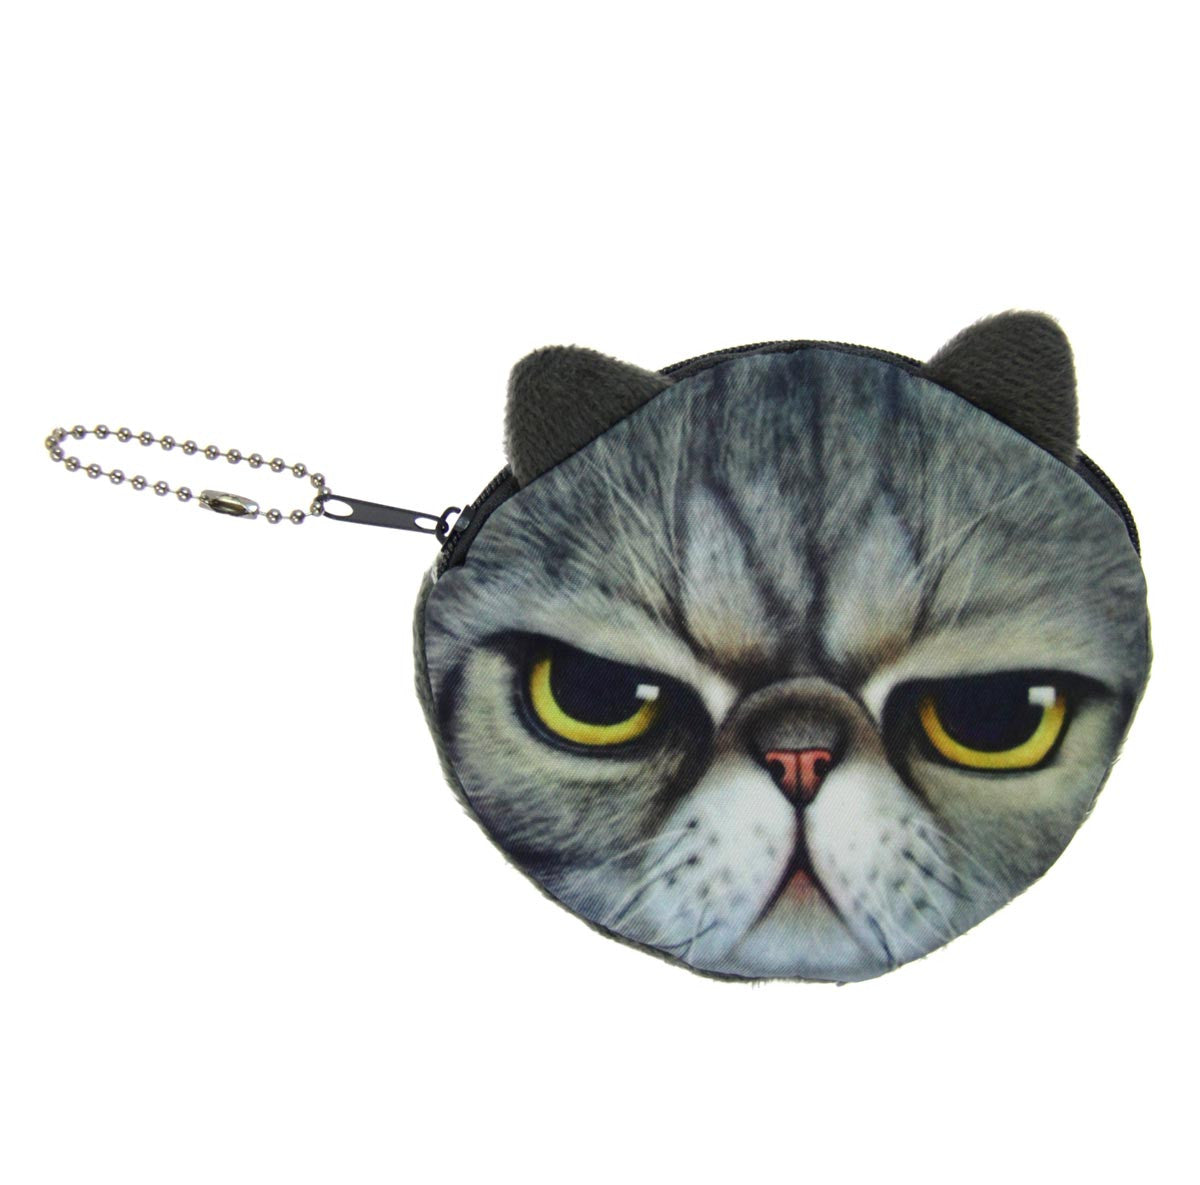 Animal Coin Purse - Angry Cat